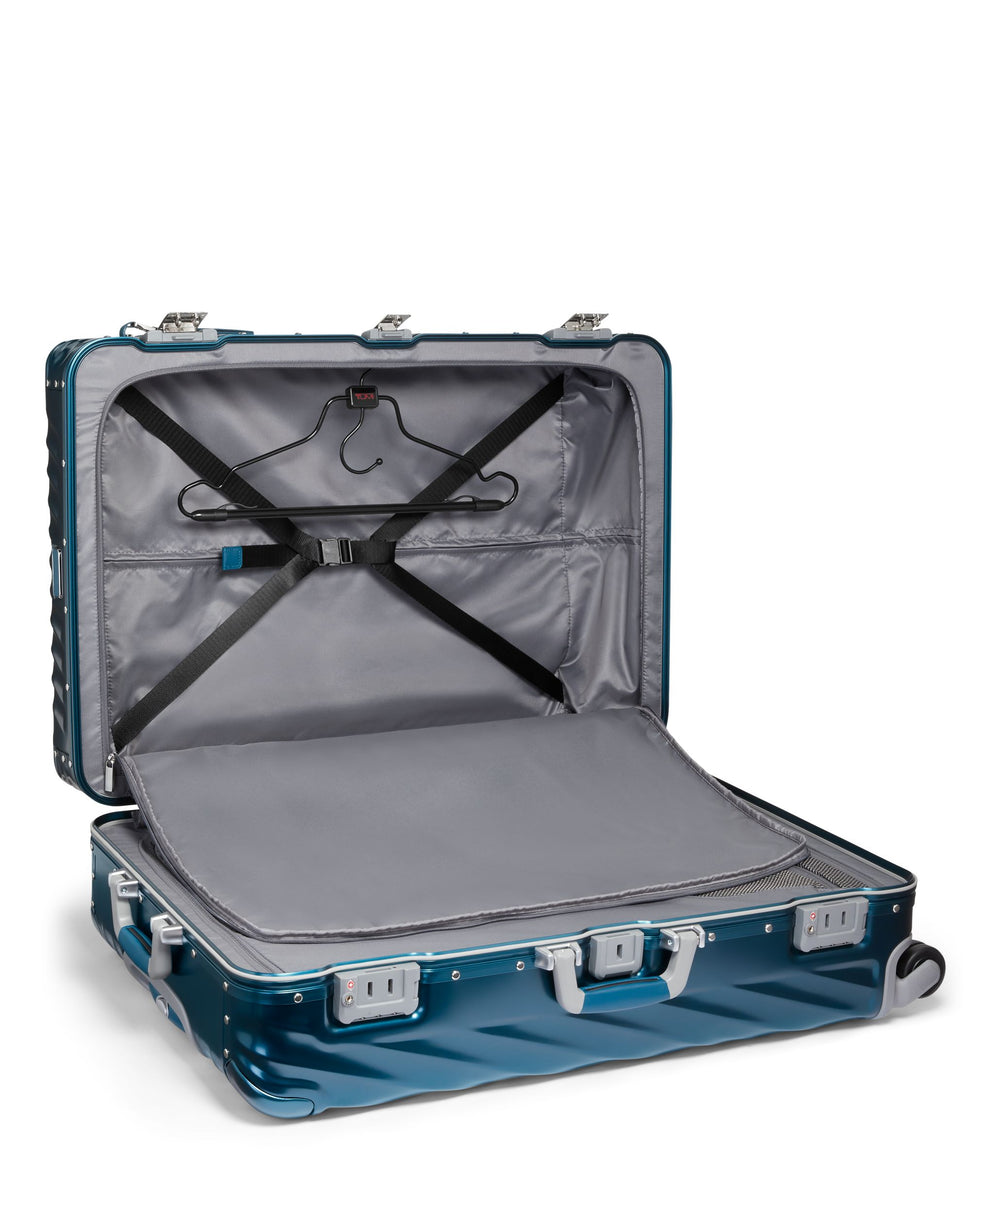 Extended Trip Packing Case